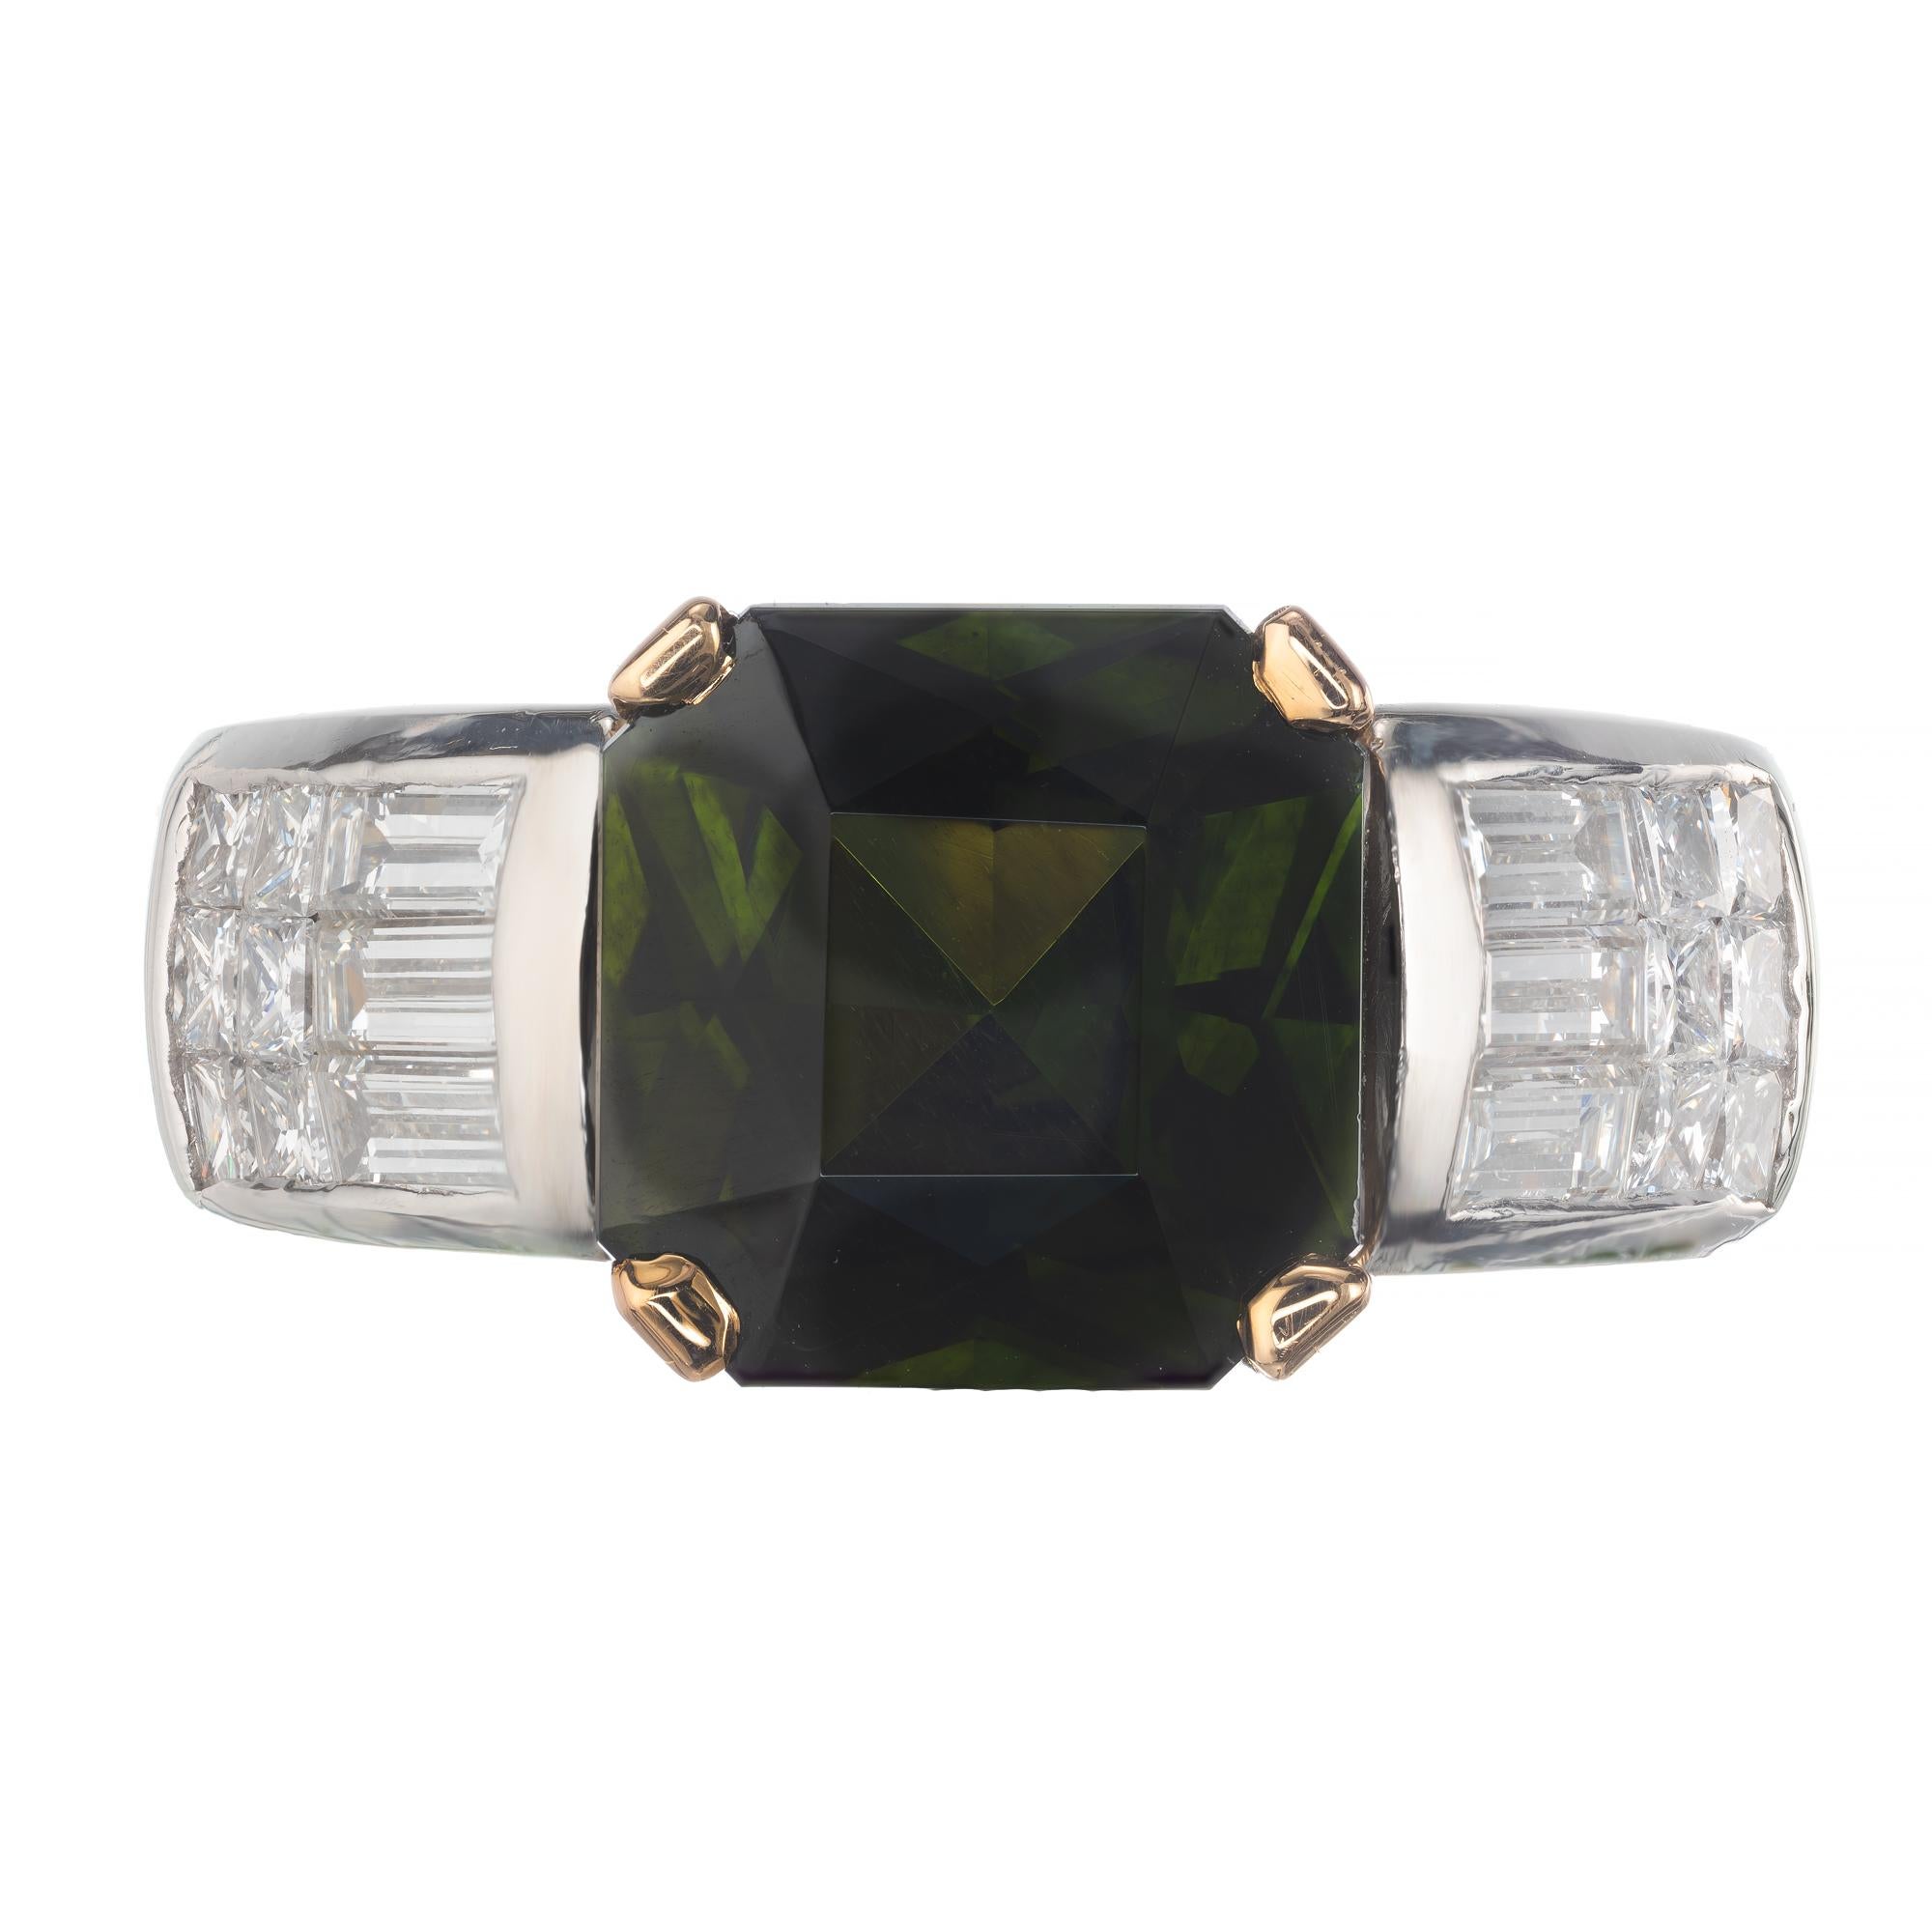 Natural untreated octagonal green zircon and diamond ring. GIA Certified center stone with baguette and princes cut accent diamonds in a platinum and 18k yellow gold setting from the Peter Suchy Workshop.

1 octagonal dark green zircon, Approximate